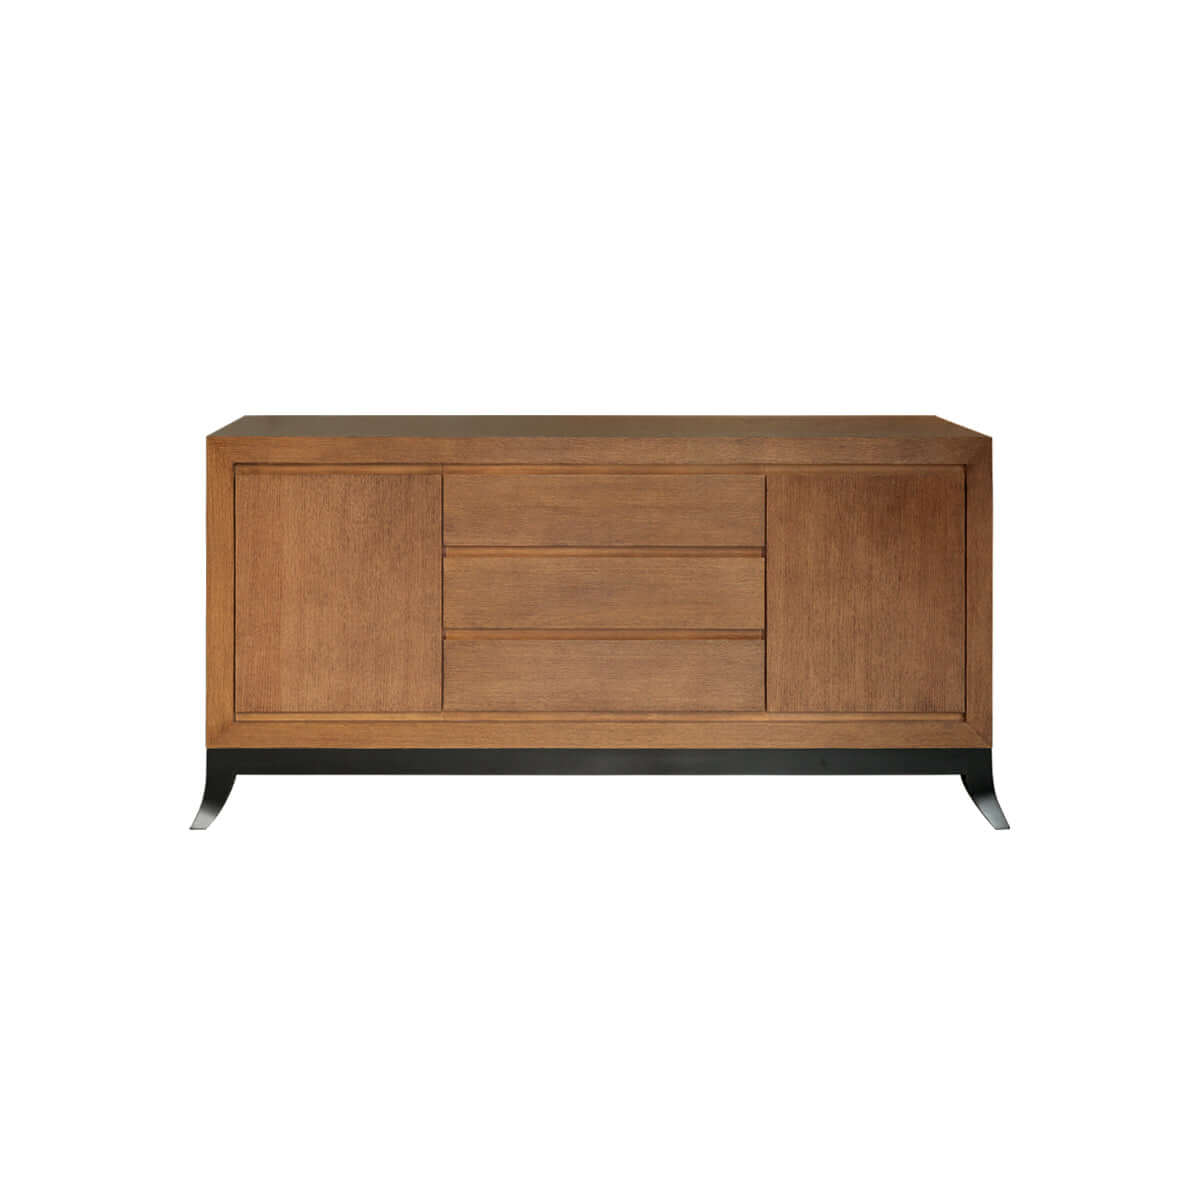 indonesian furniture online - presidio sideboard with flared legs